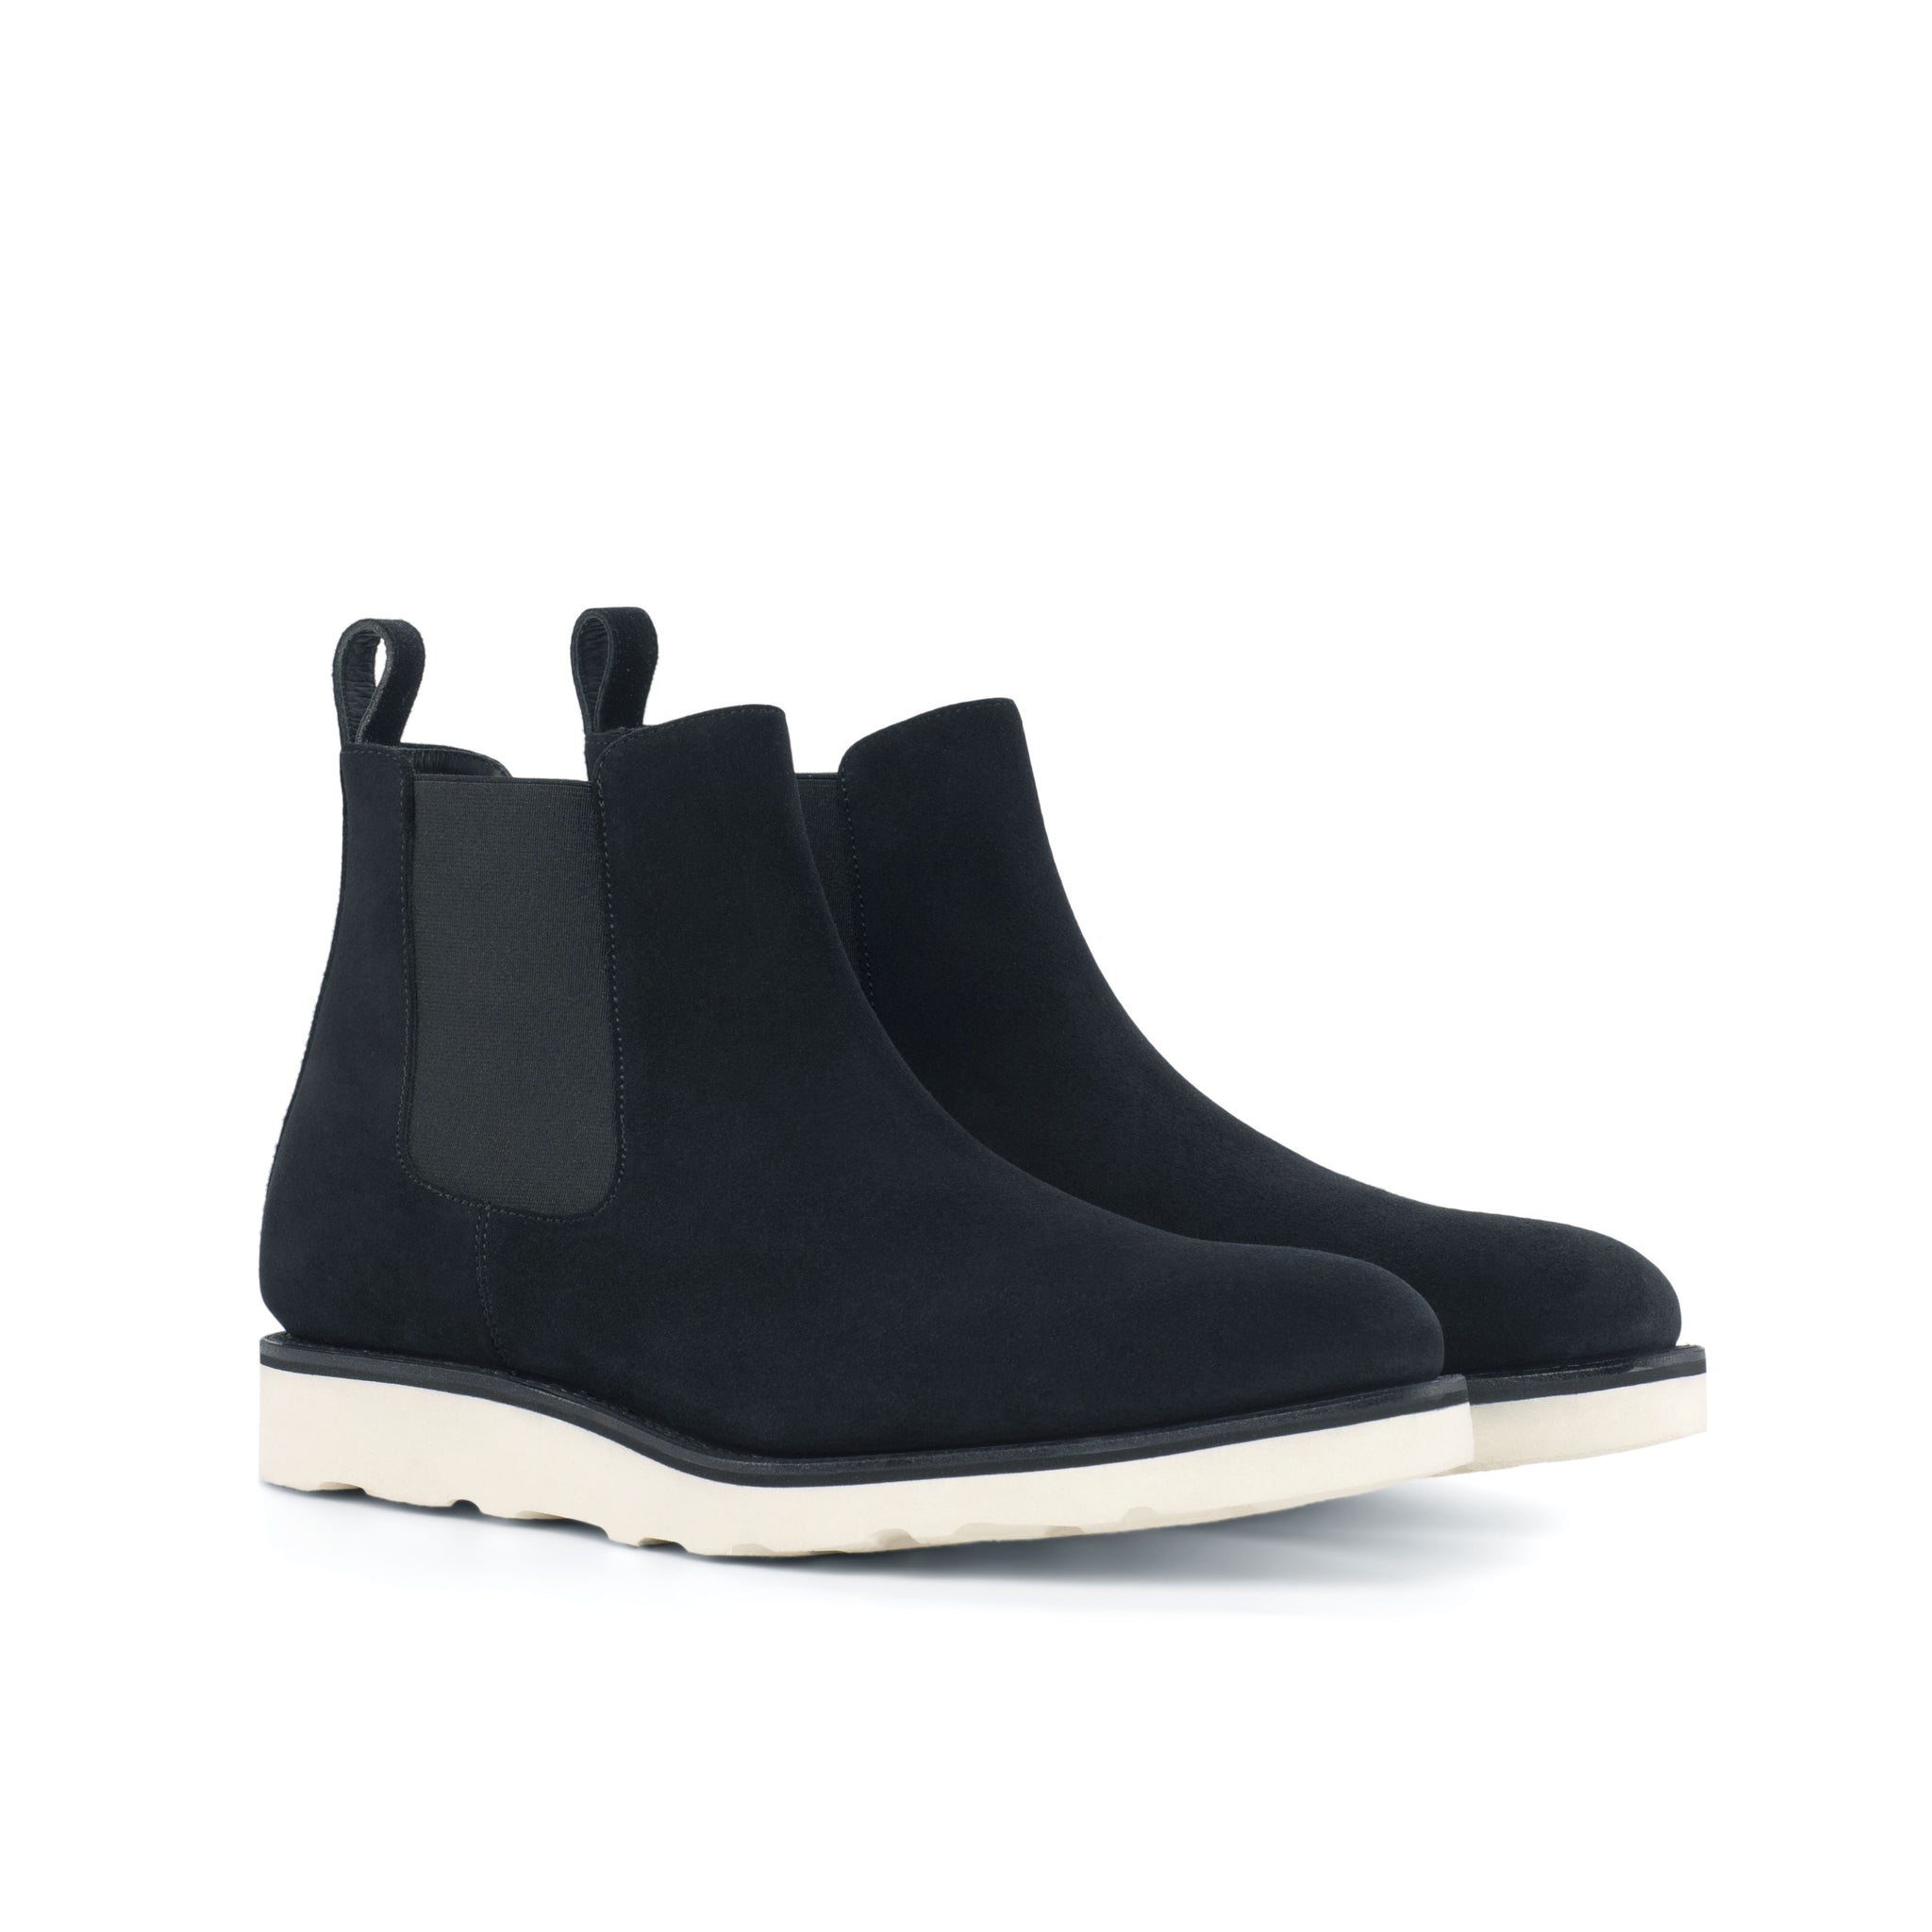 Unique Handcrafted Black Lux Suedee Chelsea Boots w/ Sportwedge Sole